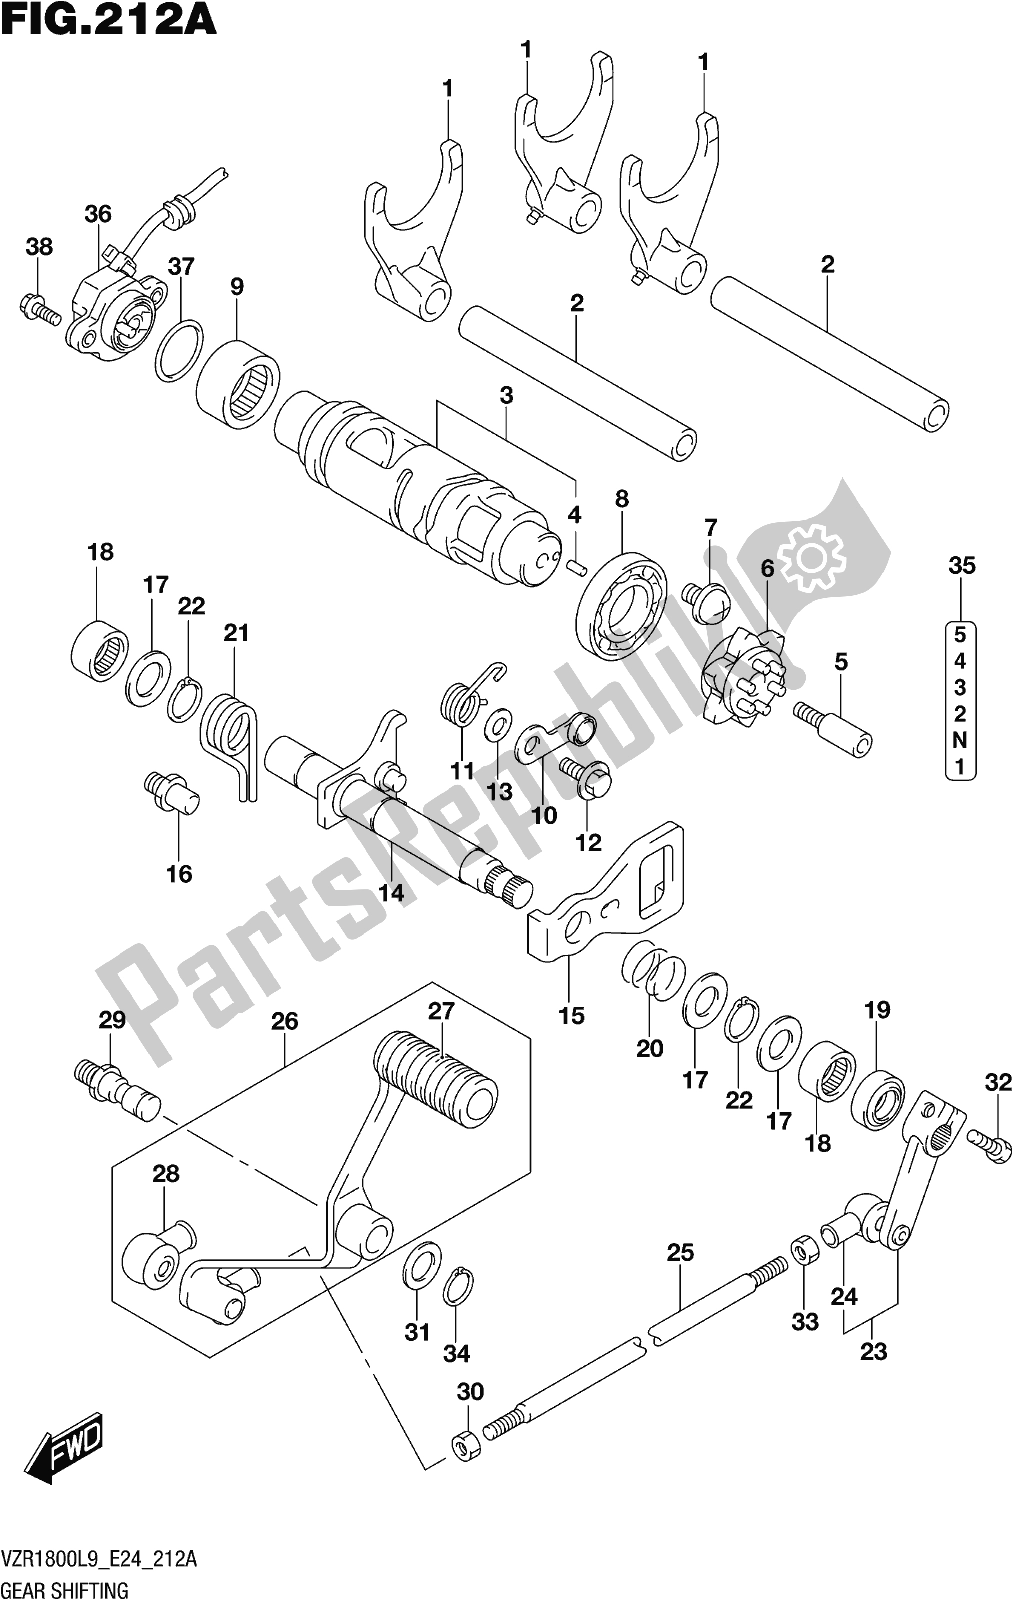 All parts for the Fig. 212a Gear Shifting of the Suzuki VZR 1800 2019